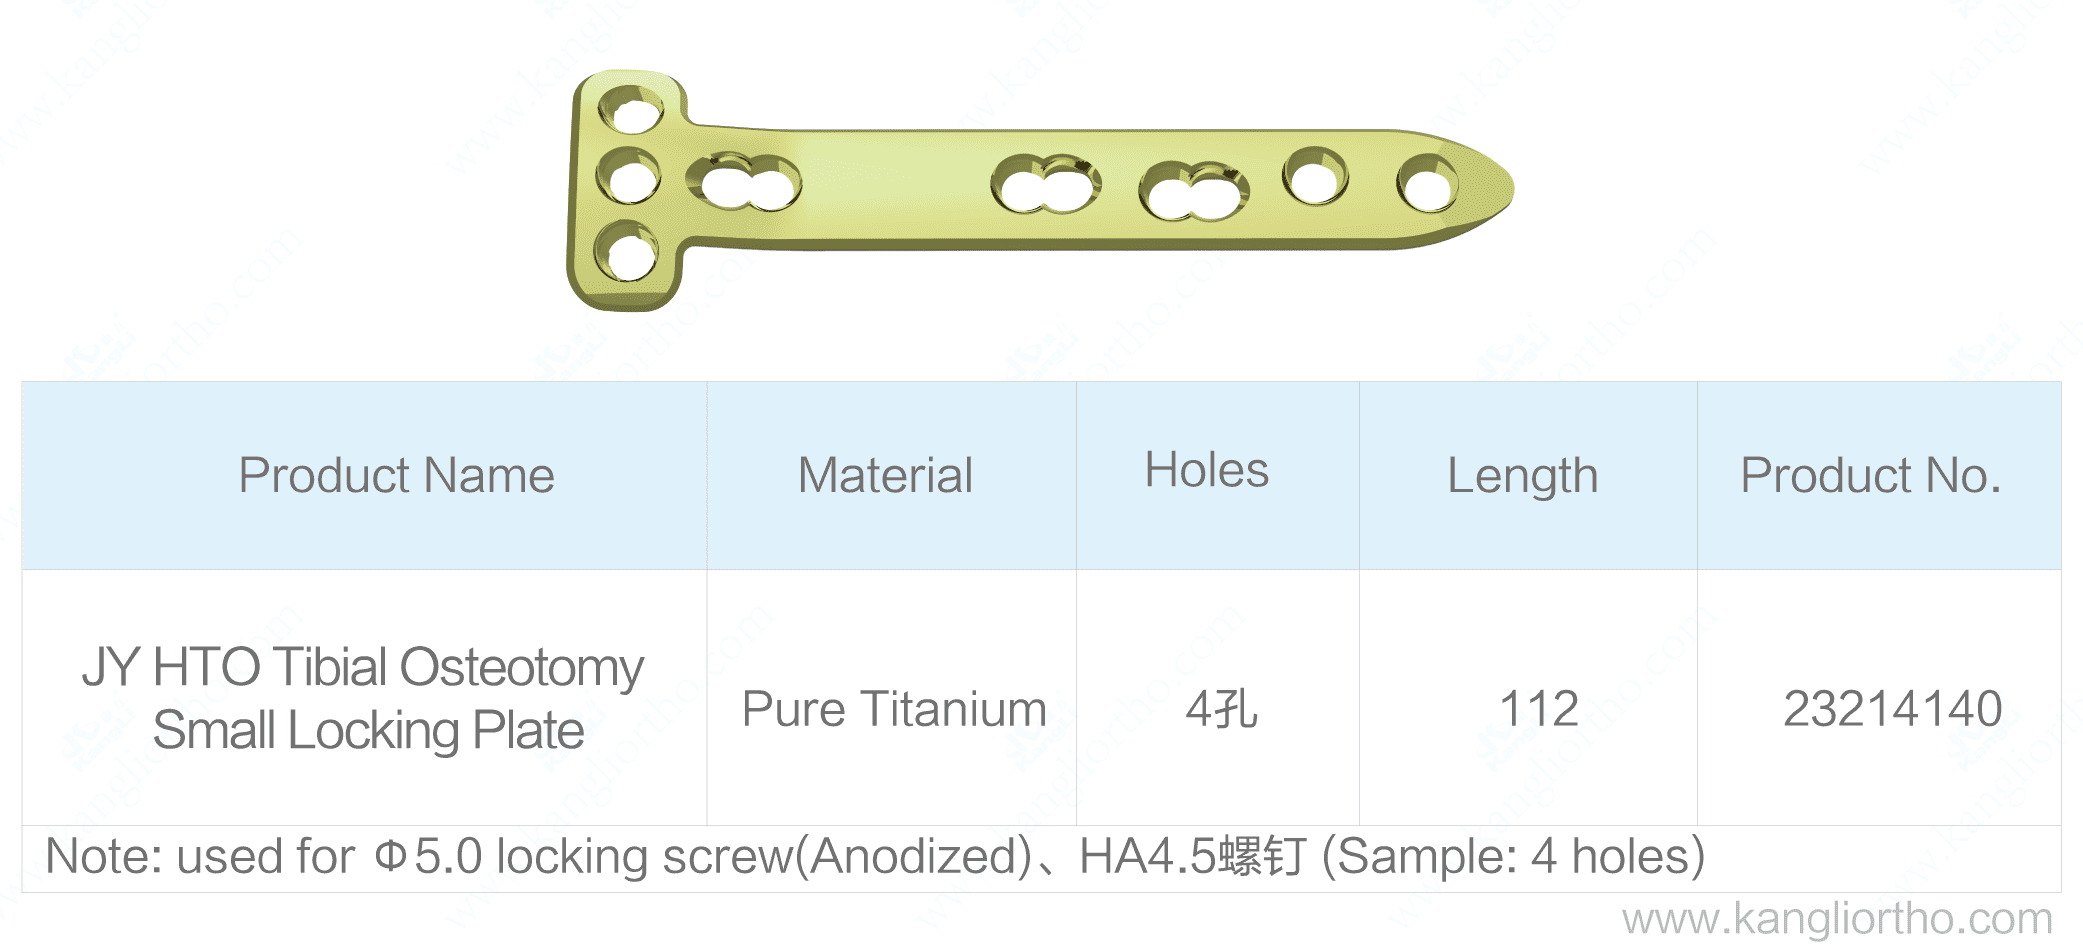 jy-hto-tibial-osteotomy-small-locking-plate-specifications